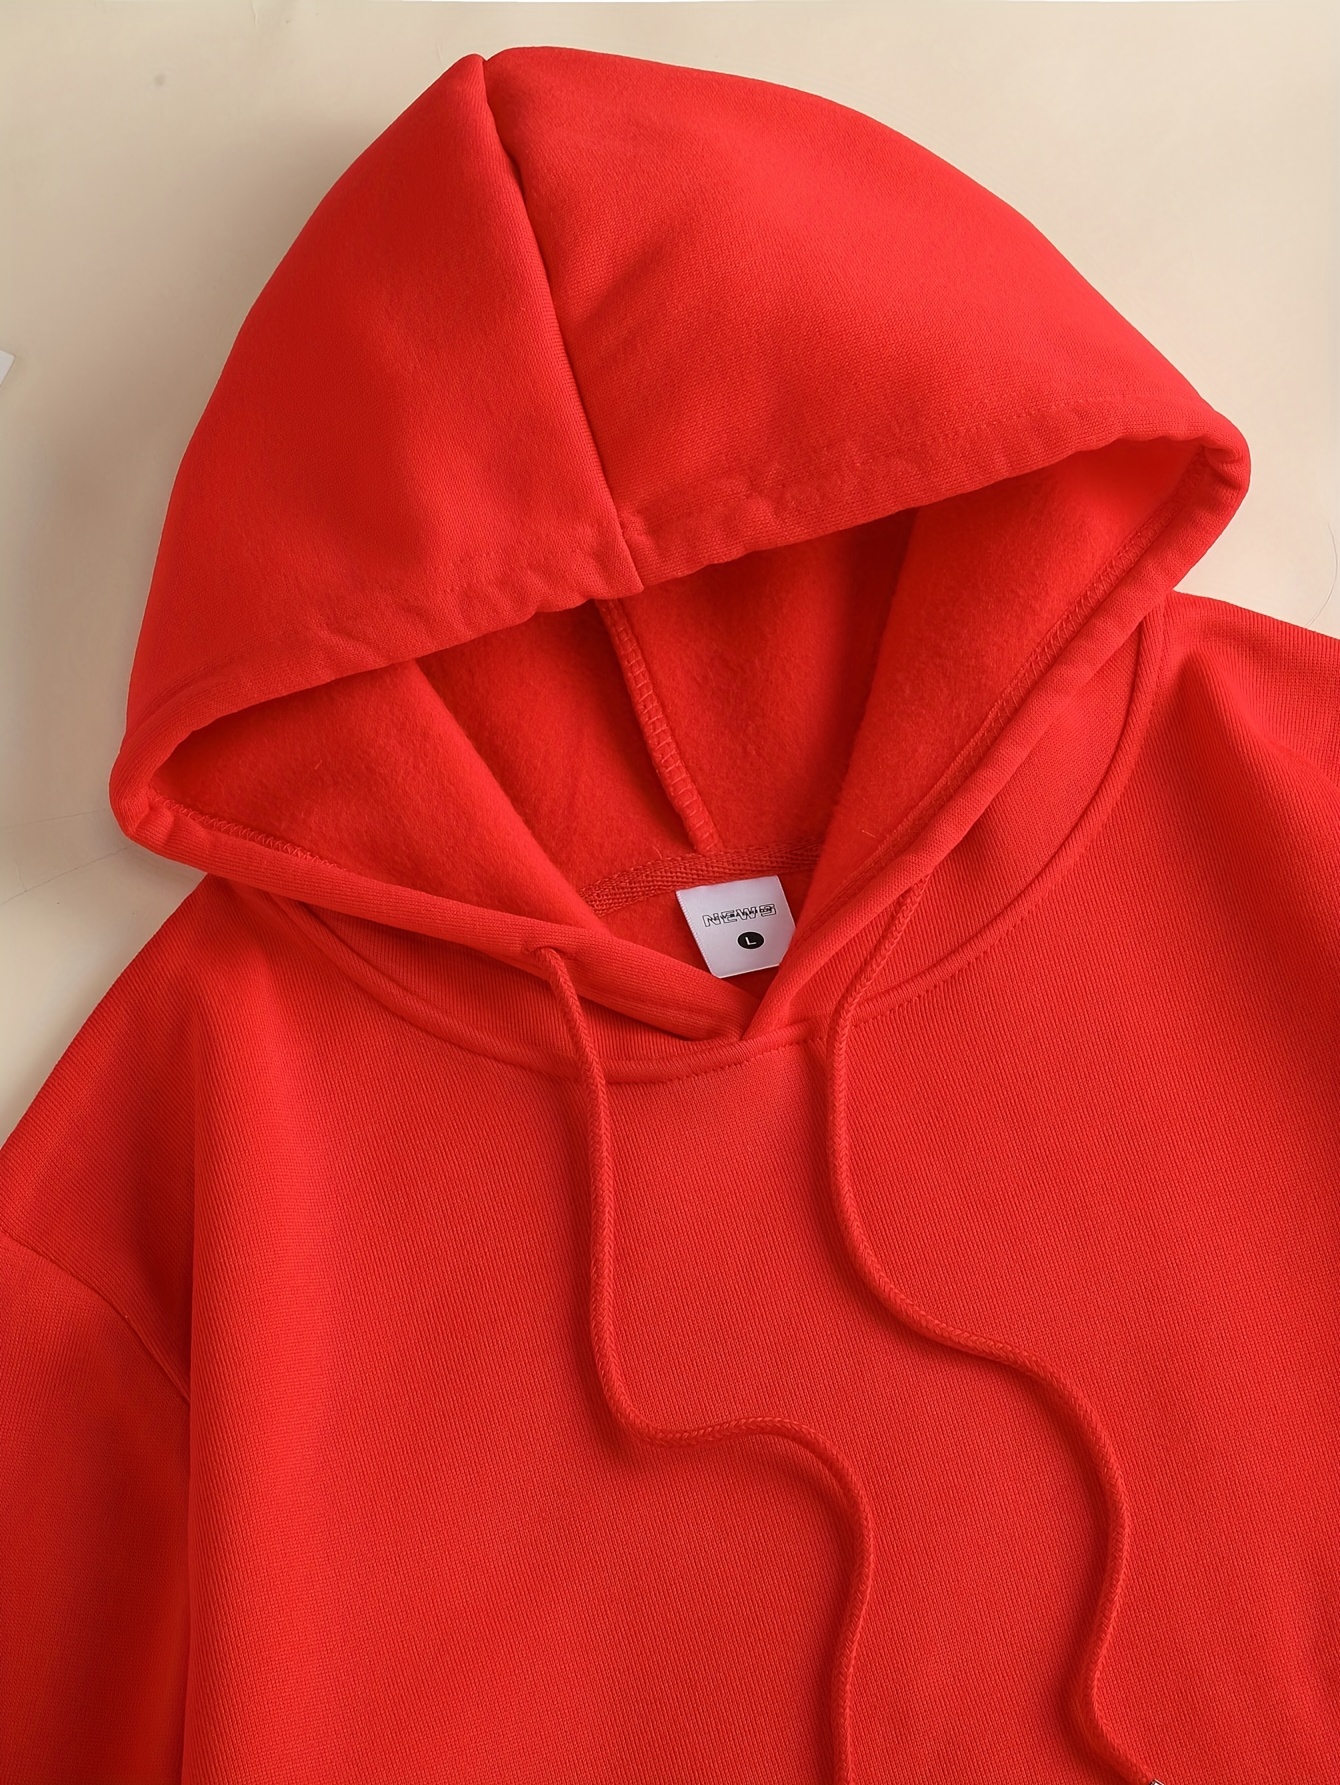 solid color hoodies for men hoodie with kangaroo pocket comfy loose trendy hooded pullover mens clothing for autumn winter details 21